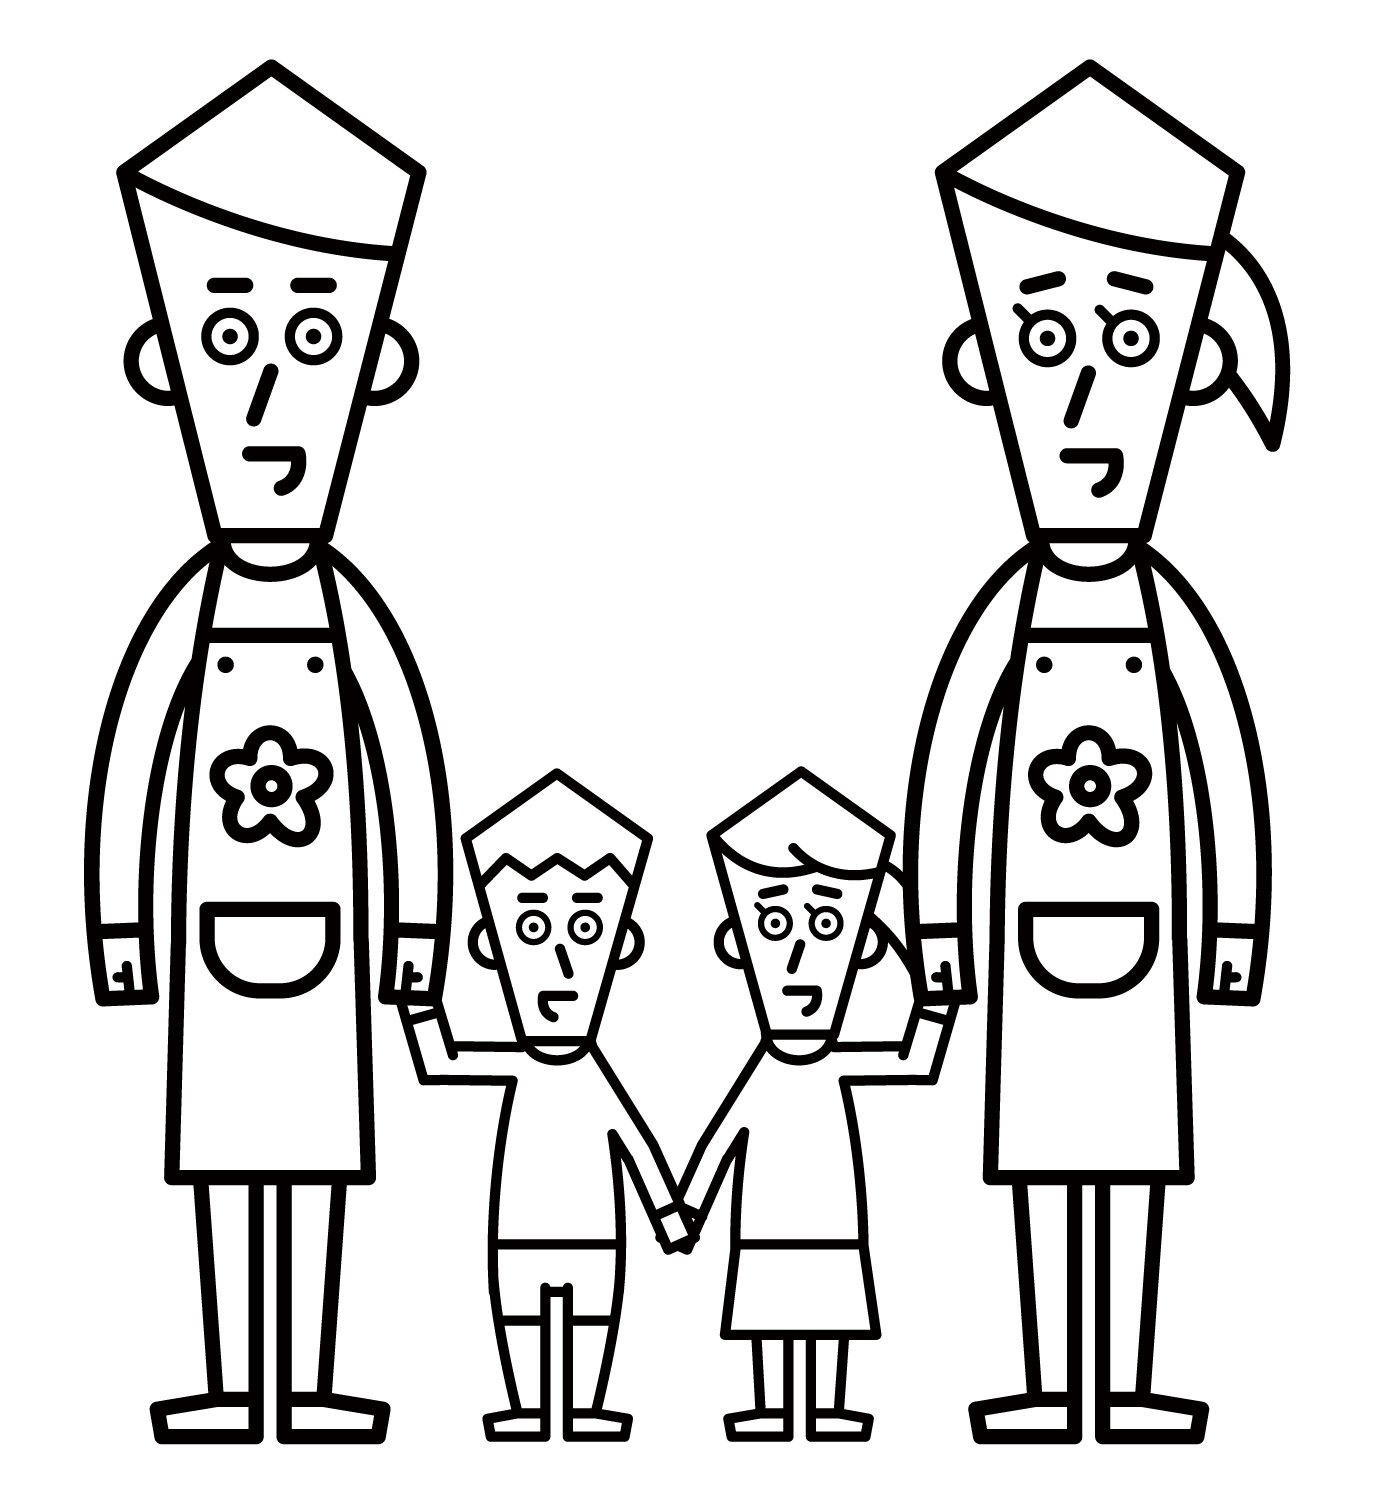 Illustration of children and nursery teachers (male and female)